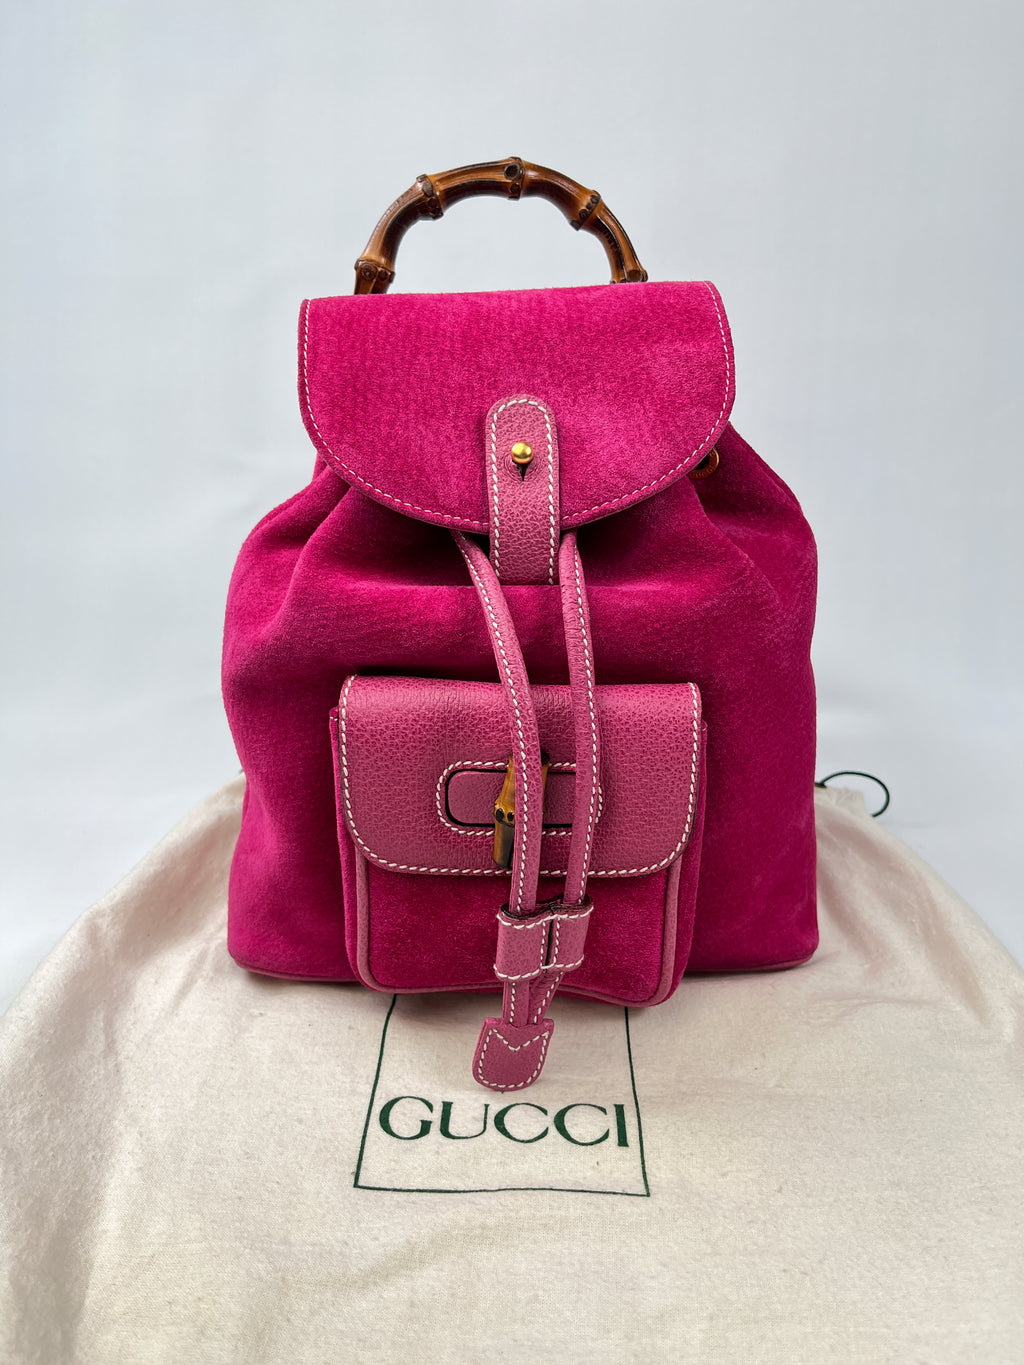 GUCCI - PINK SUEDE BAMBOO DRAWSTRING BACKPACK